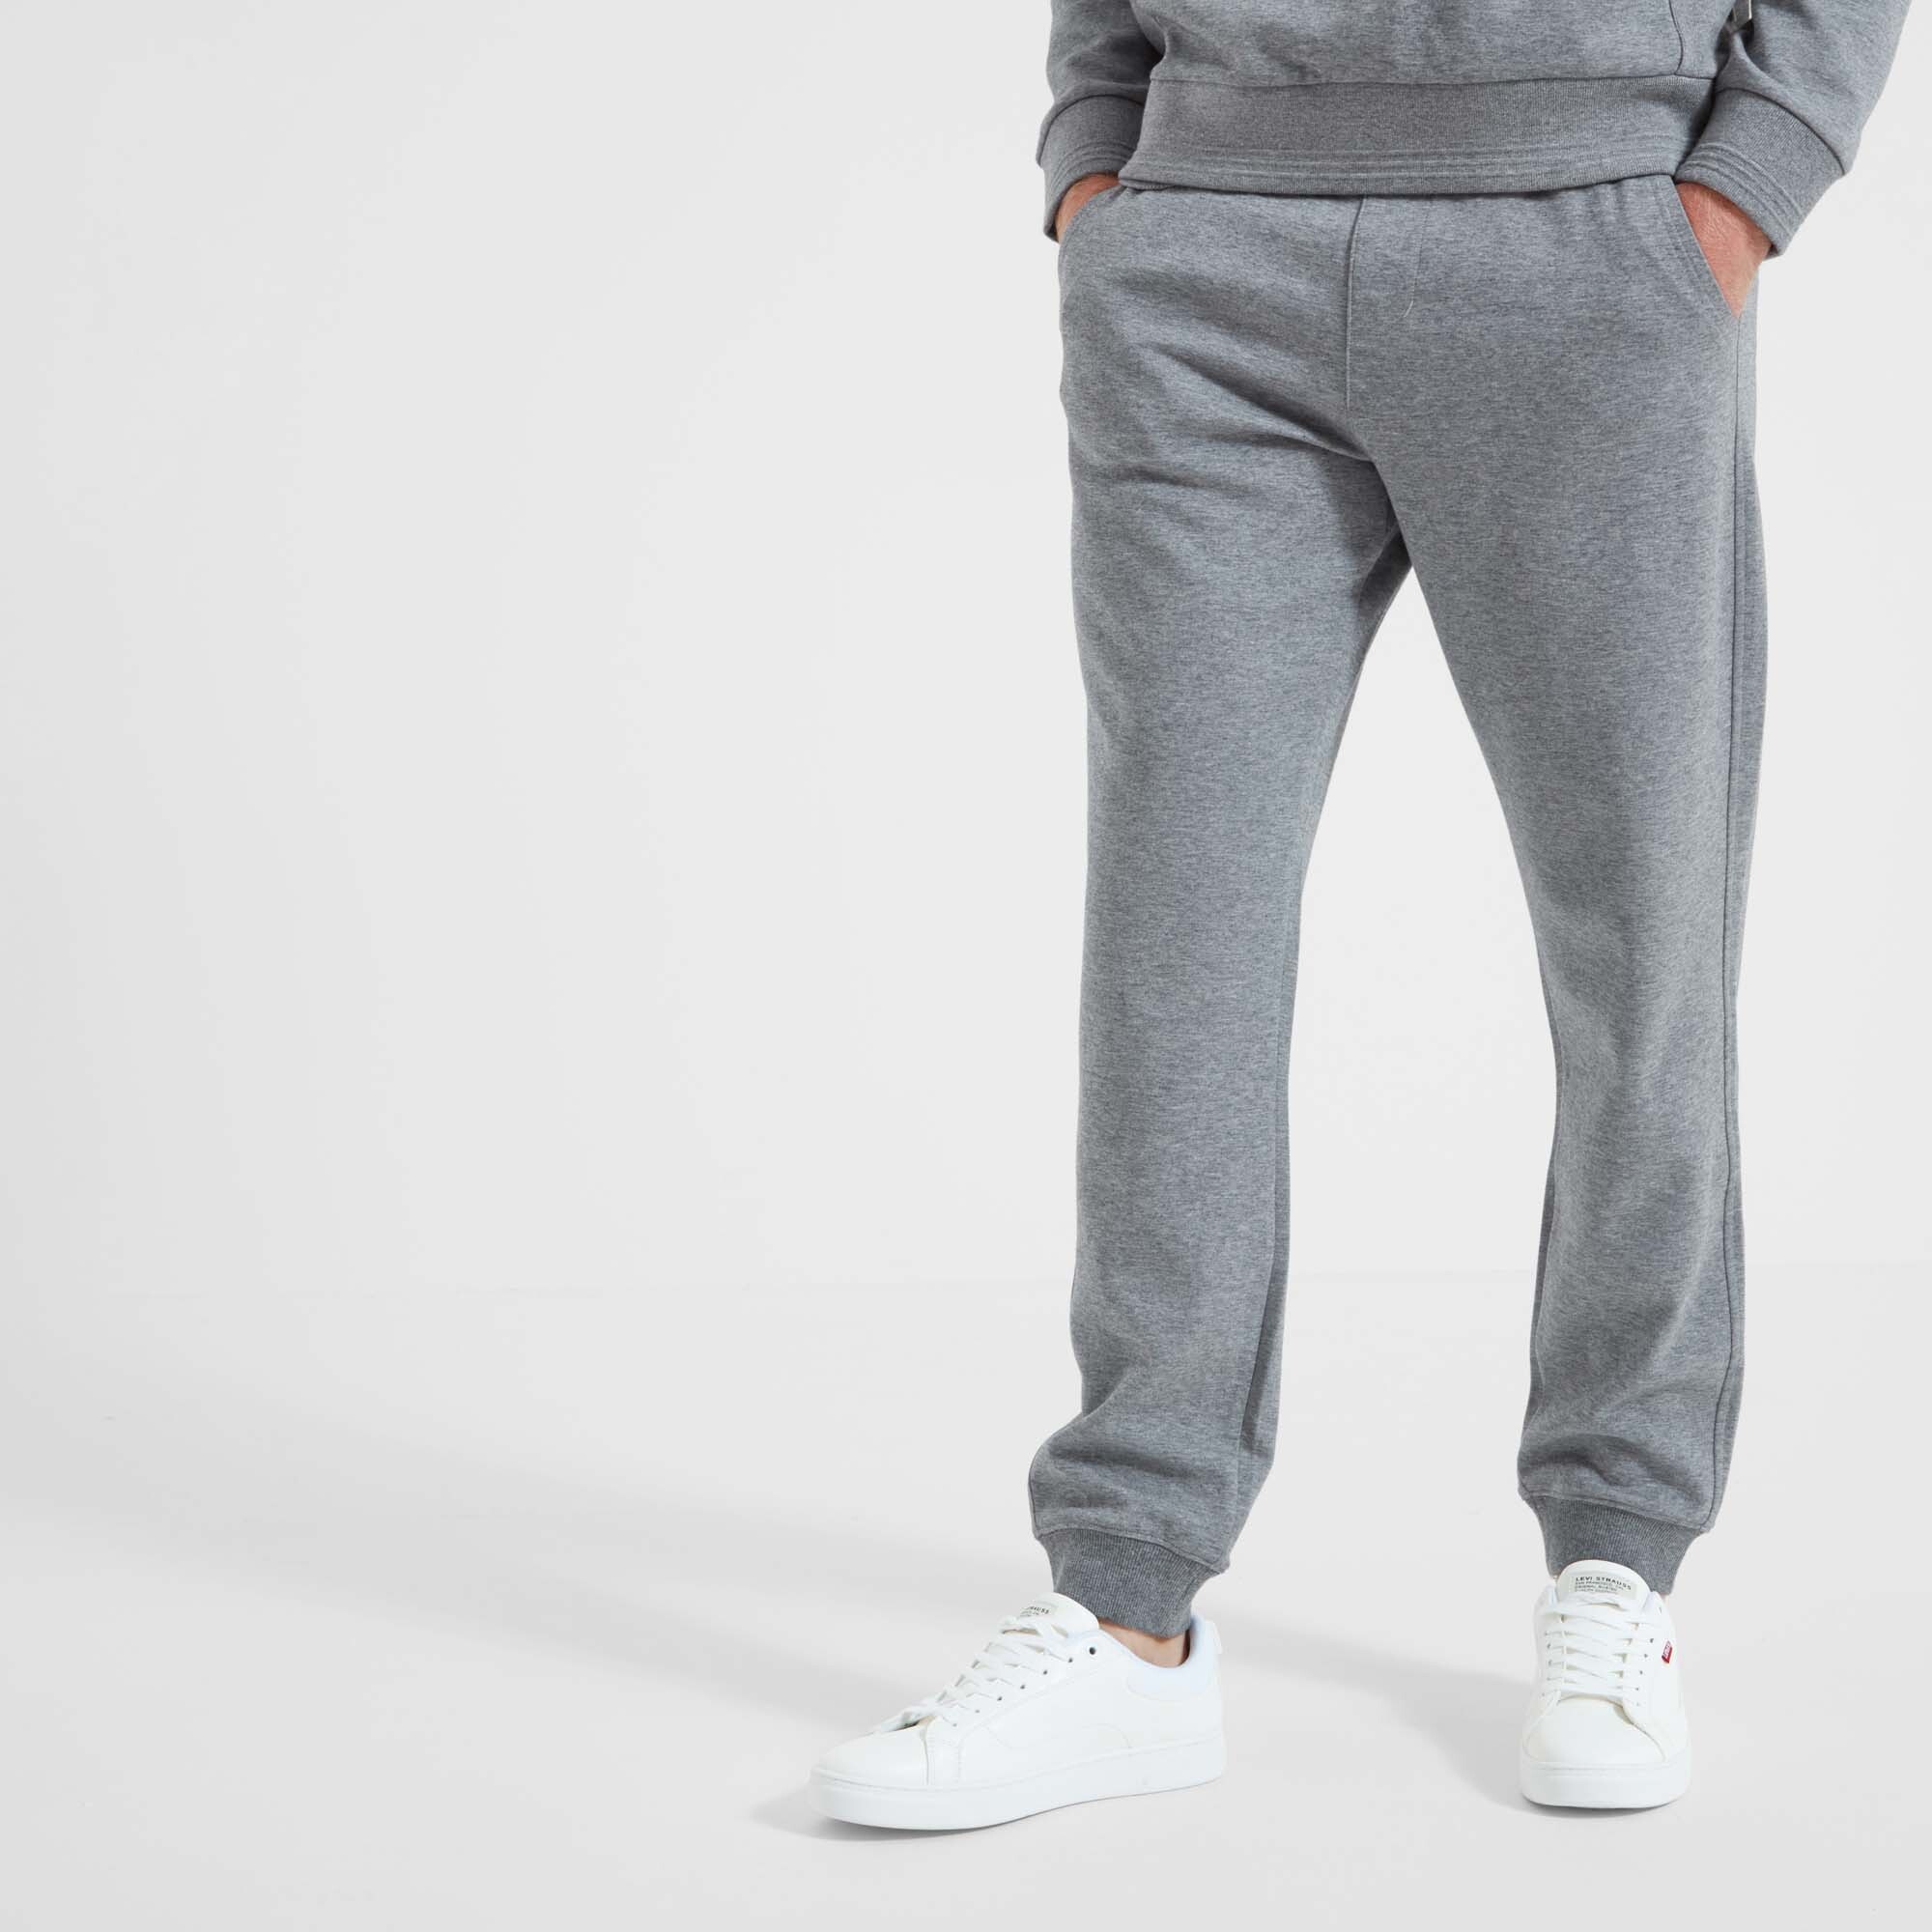 Falmouth Leisure Trousers Grey